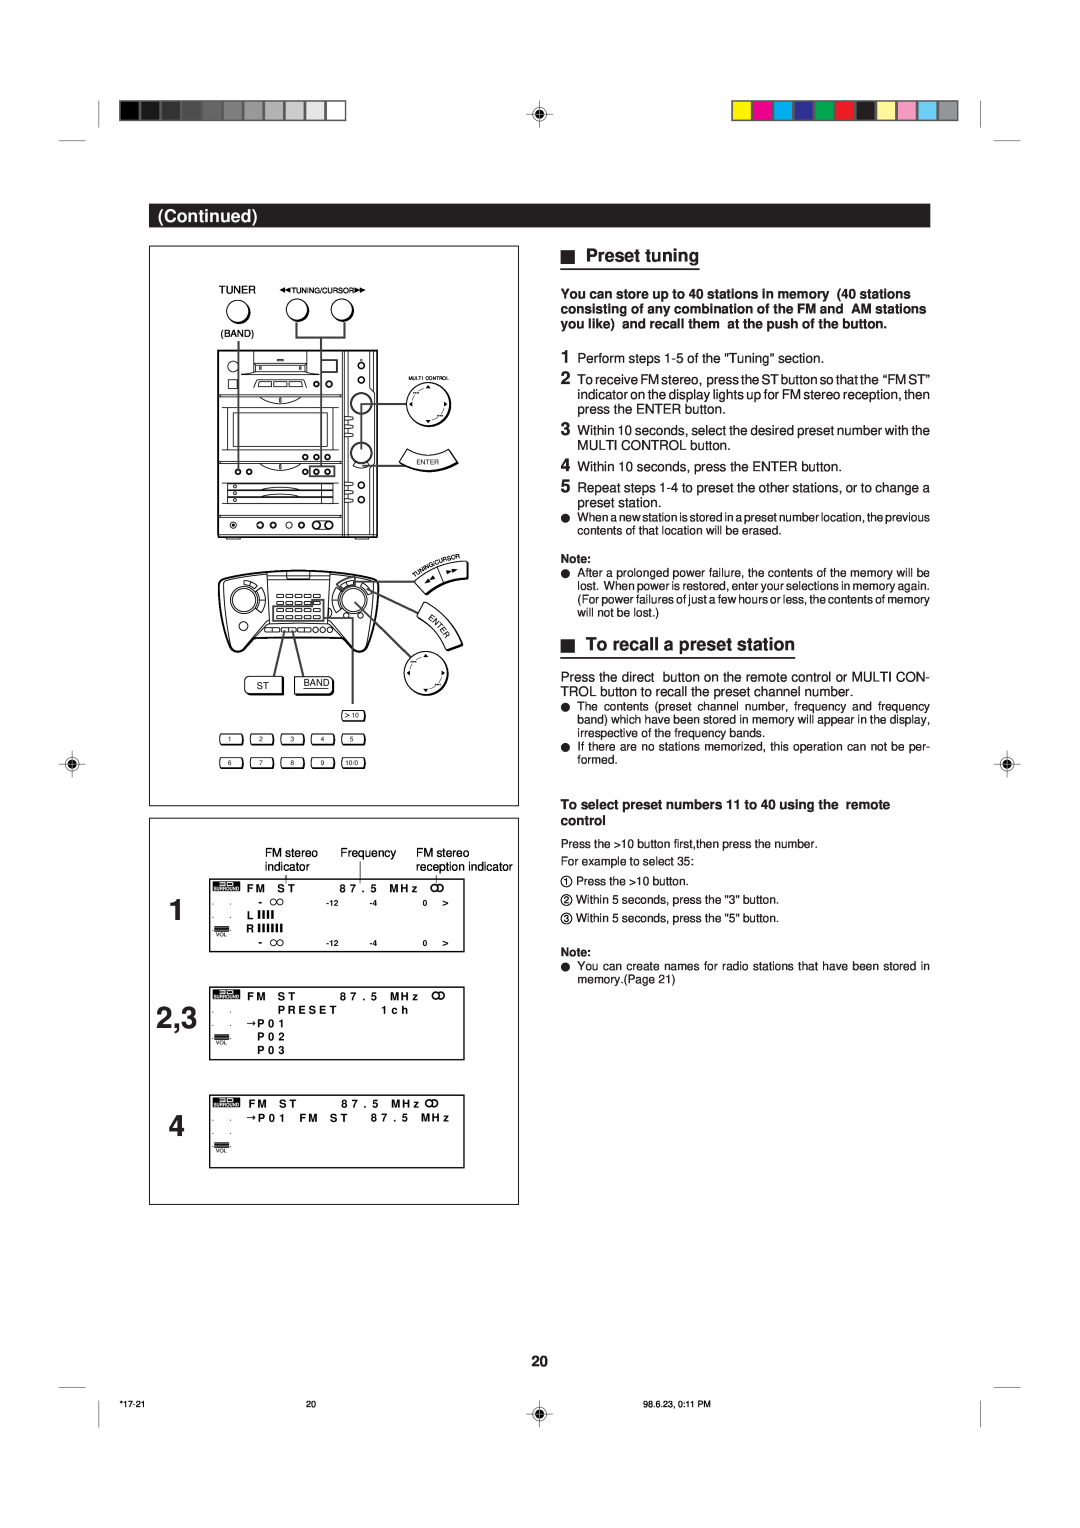 Sharp MD-X8 operation manual HPreset tuning, HTo recall a preset station, Continued 